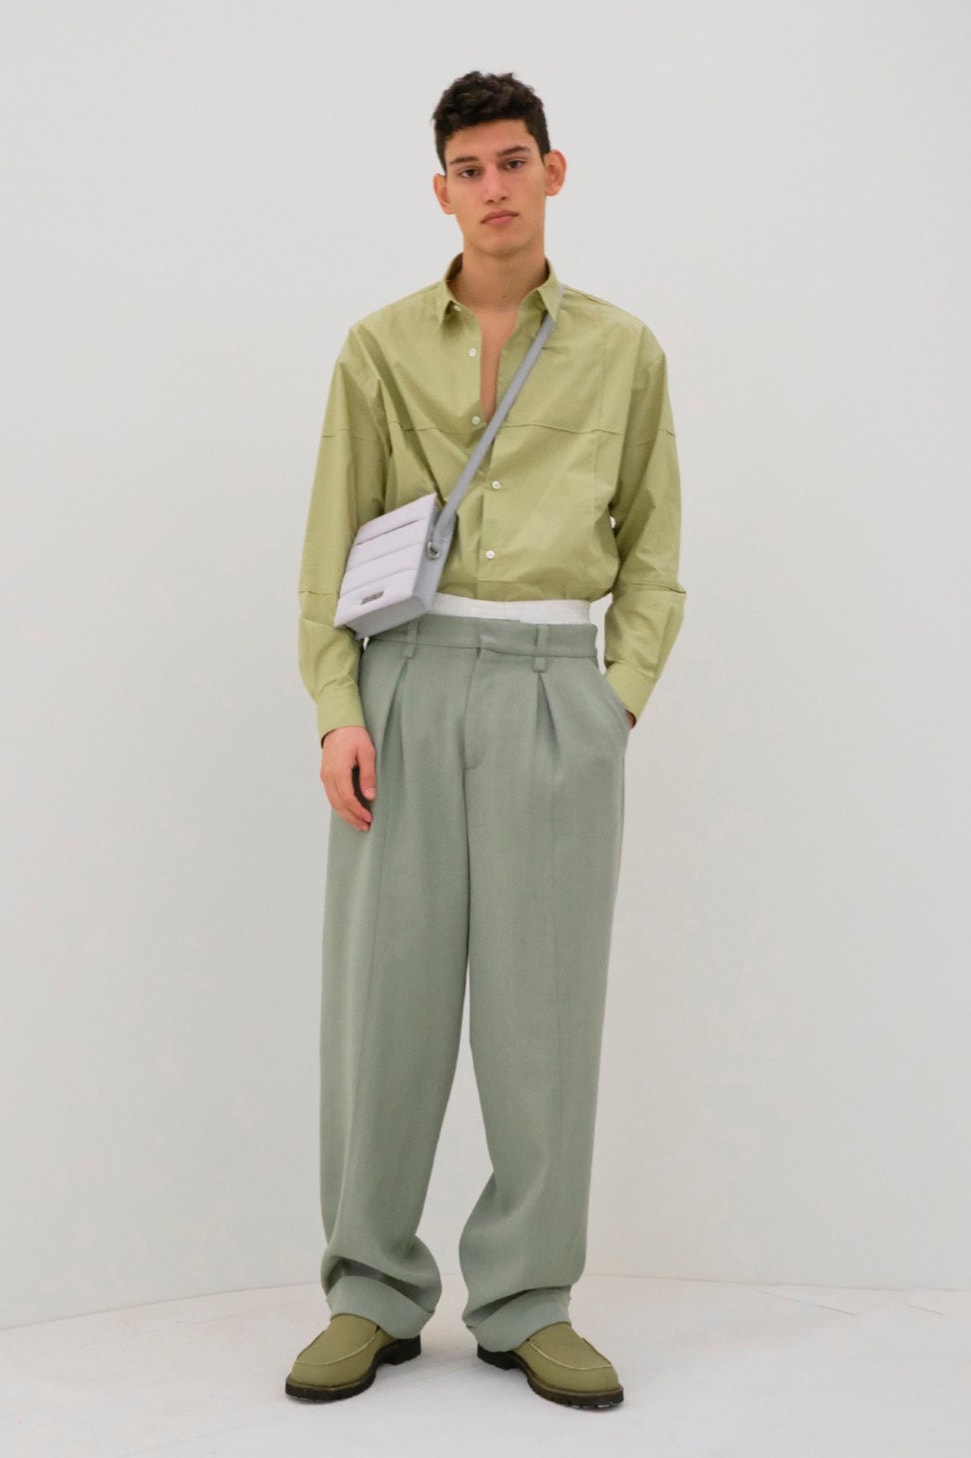 Jacquemus Fall/Winter 2020 Men's Collection Lookbook